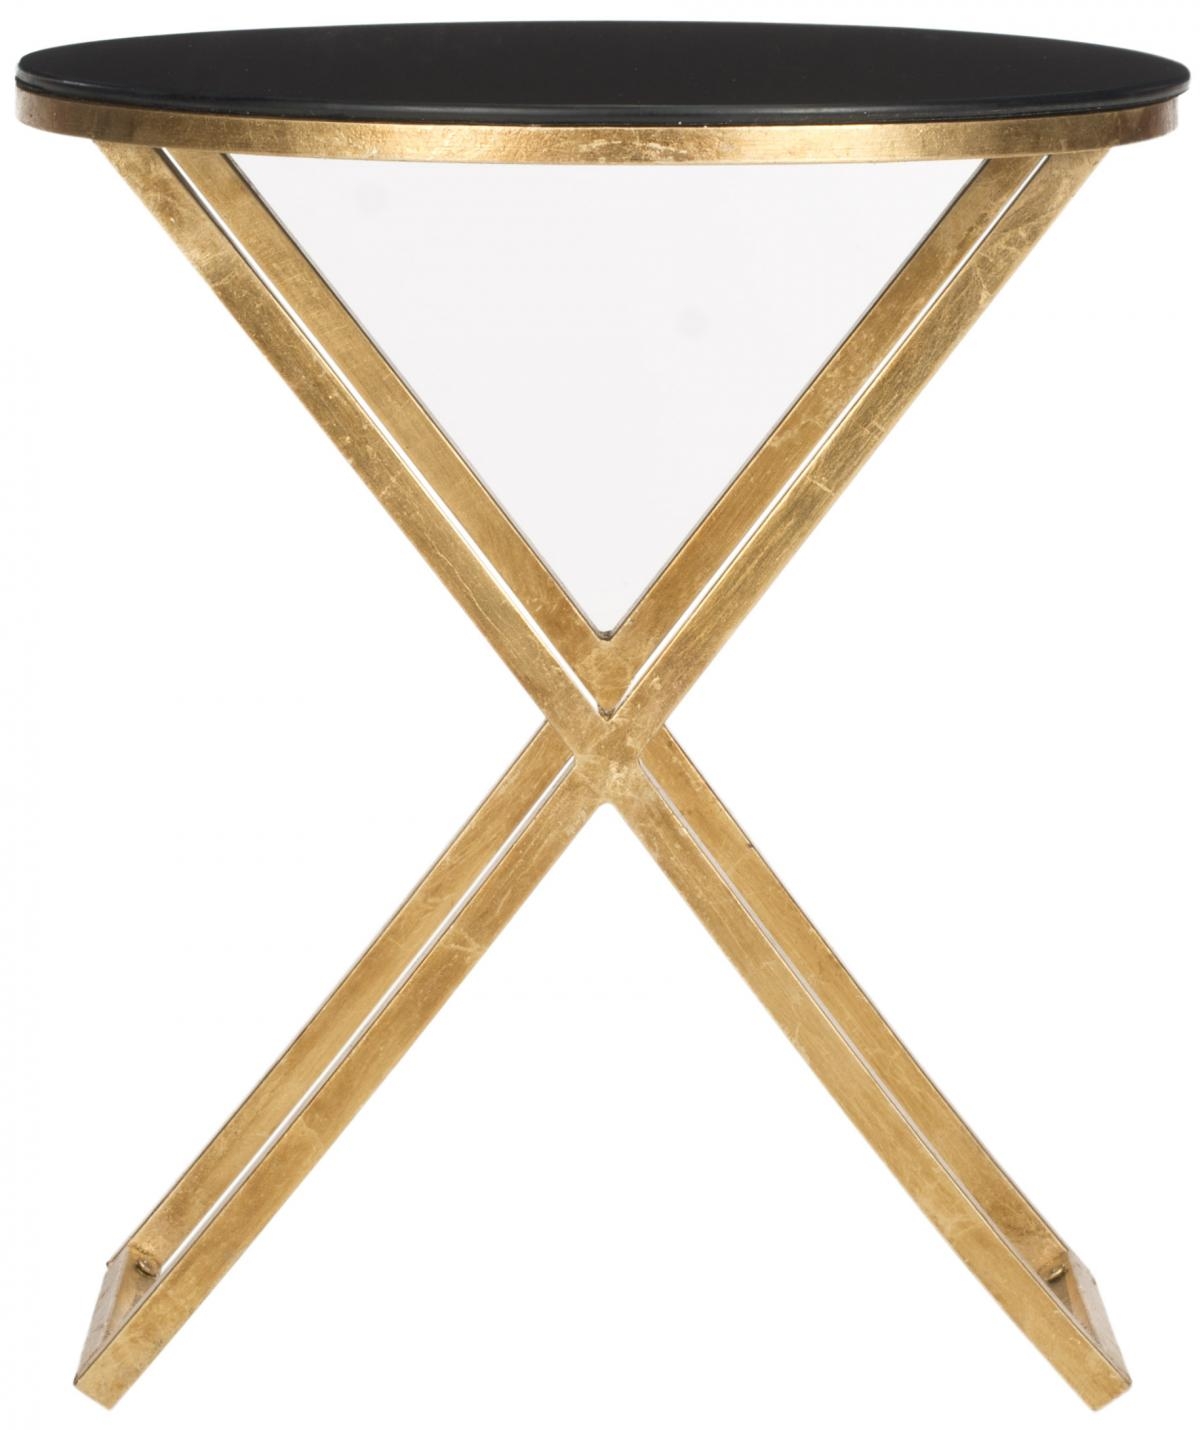 Riona Round Top Accent Table - Gold/Black - Arlo Home - Image 1